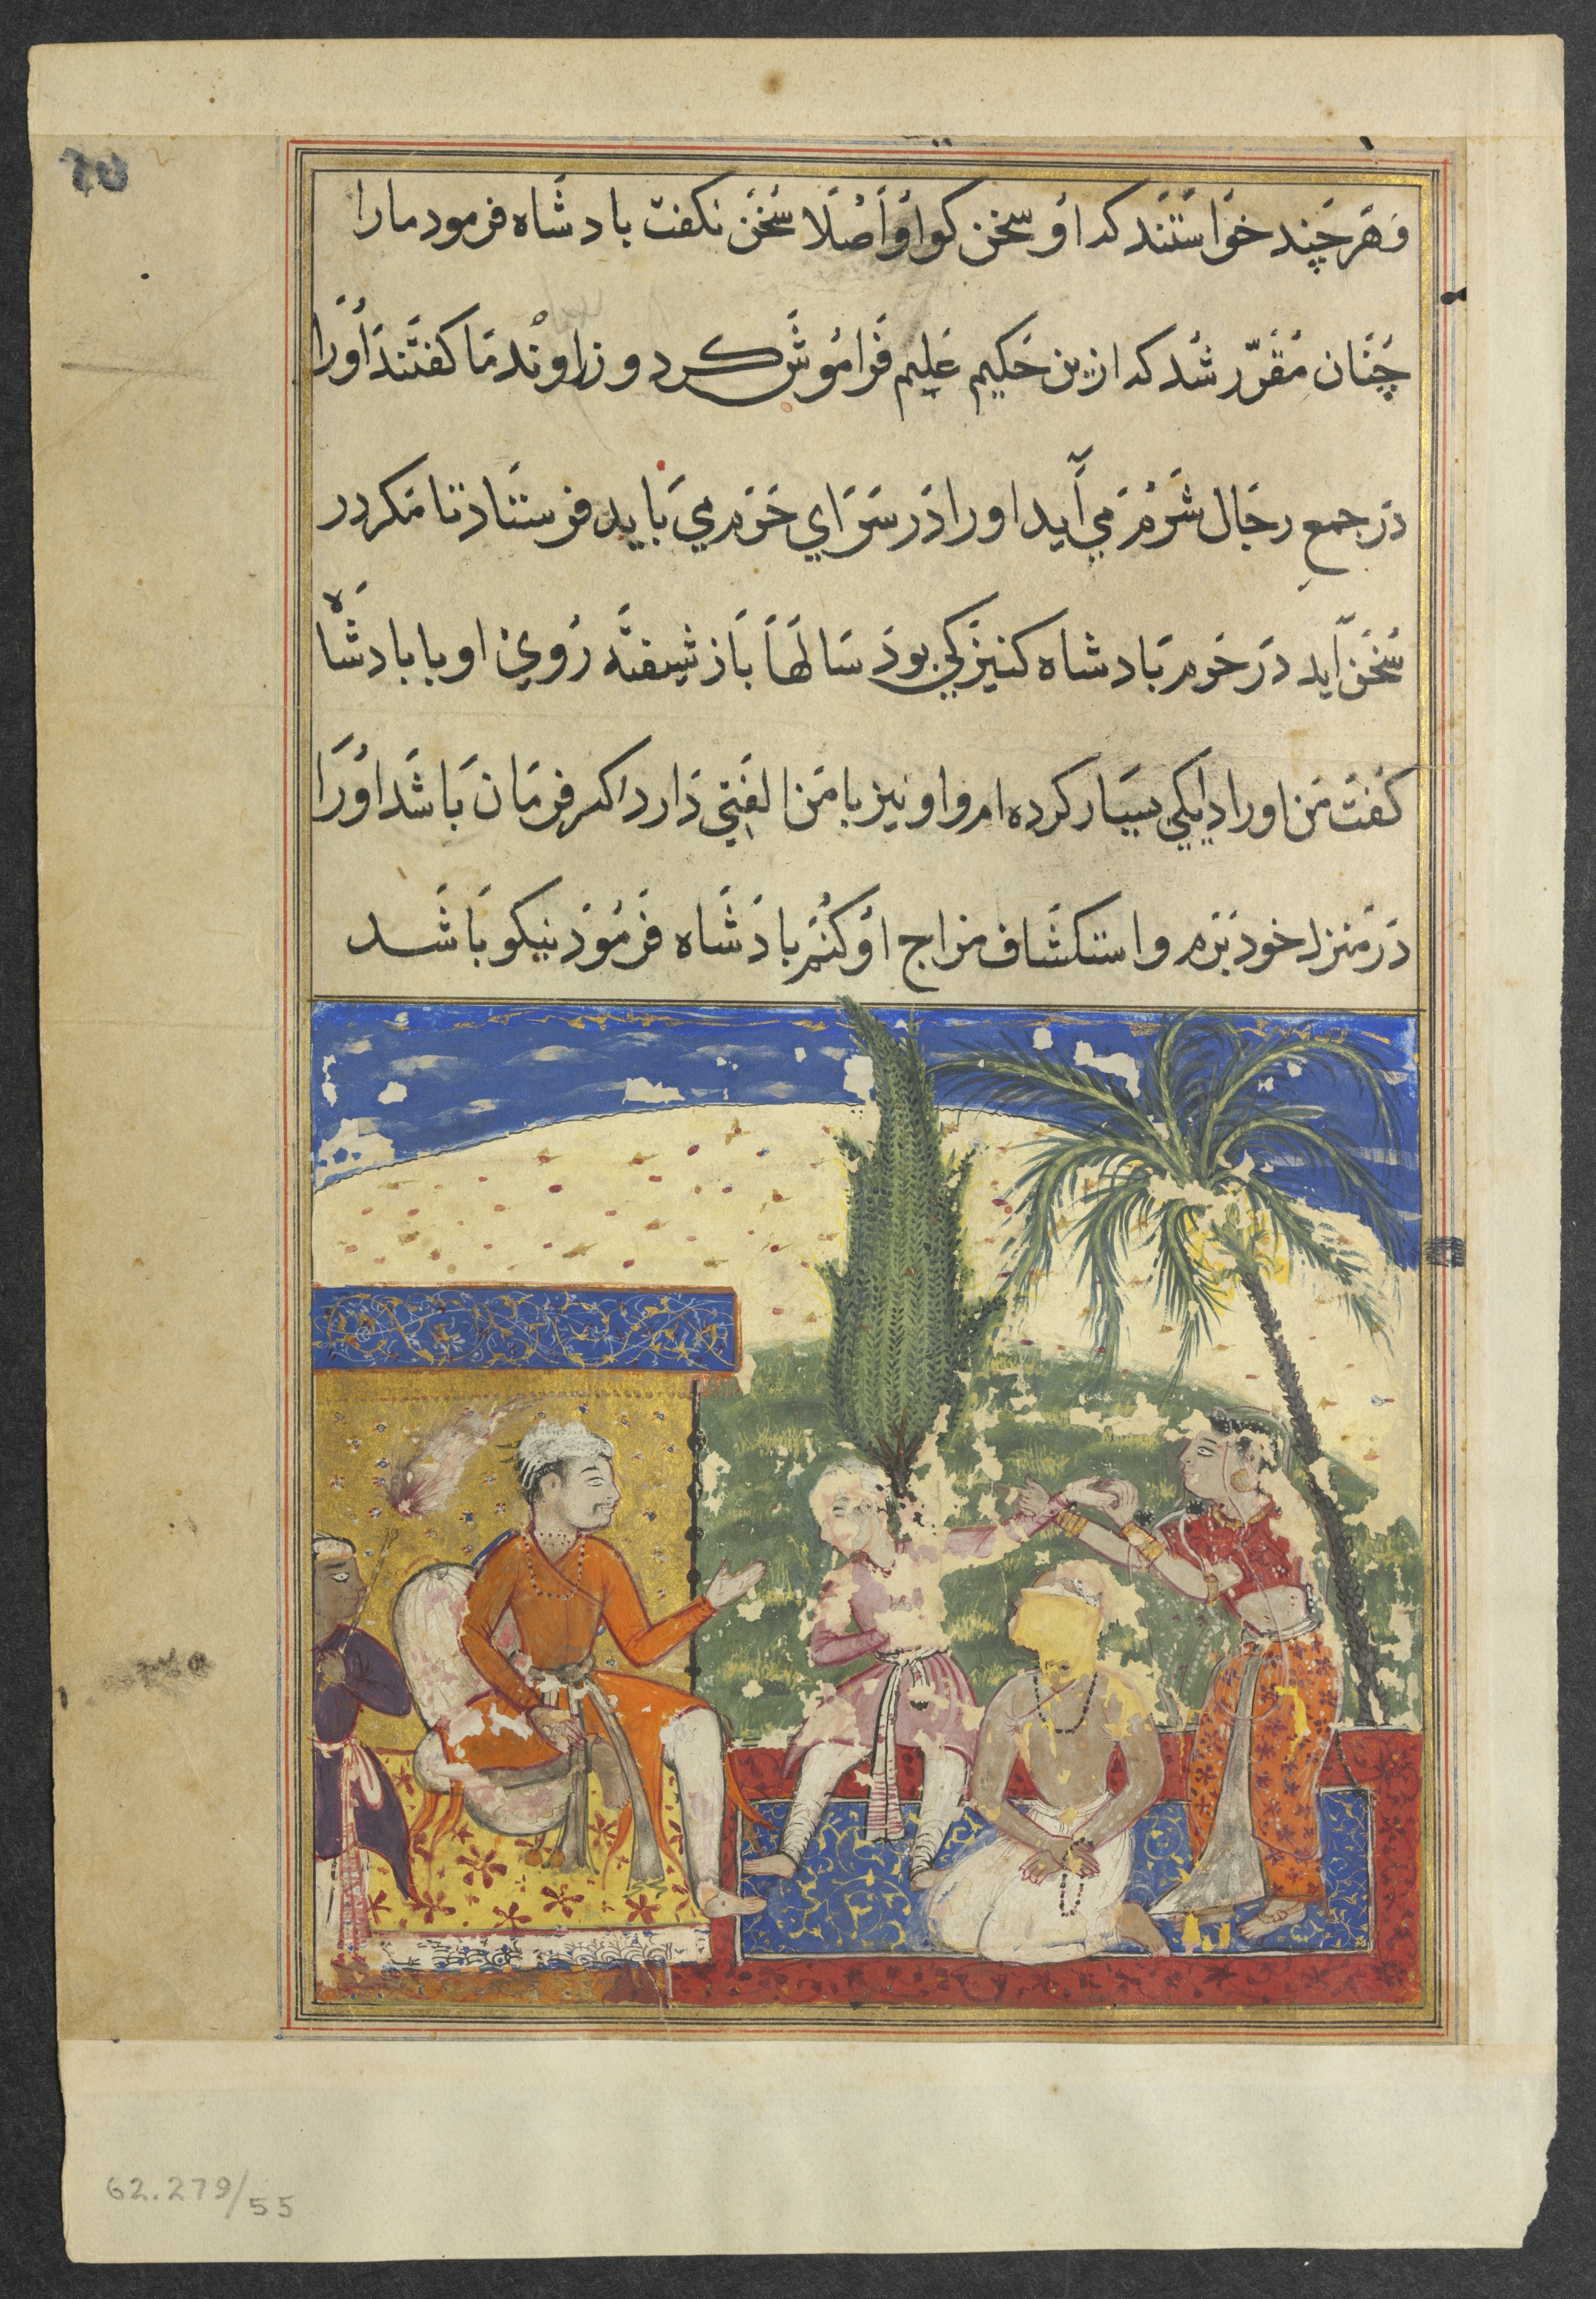 The king’s handmaiden takes the prince away to the harem, from a Tuti-nama (Tales of a Parrot): Eighth Night